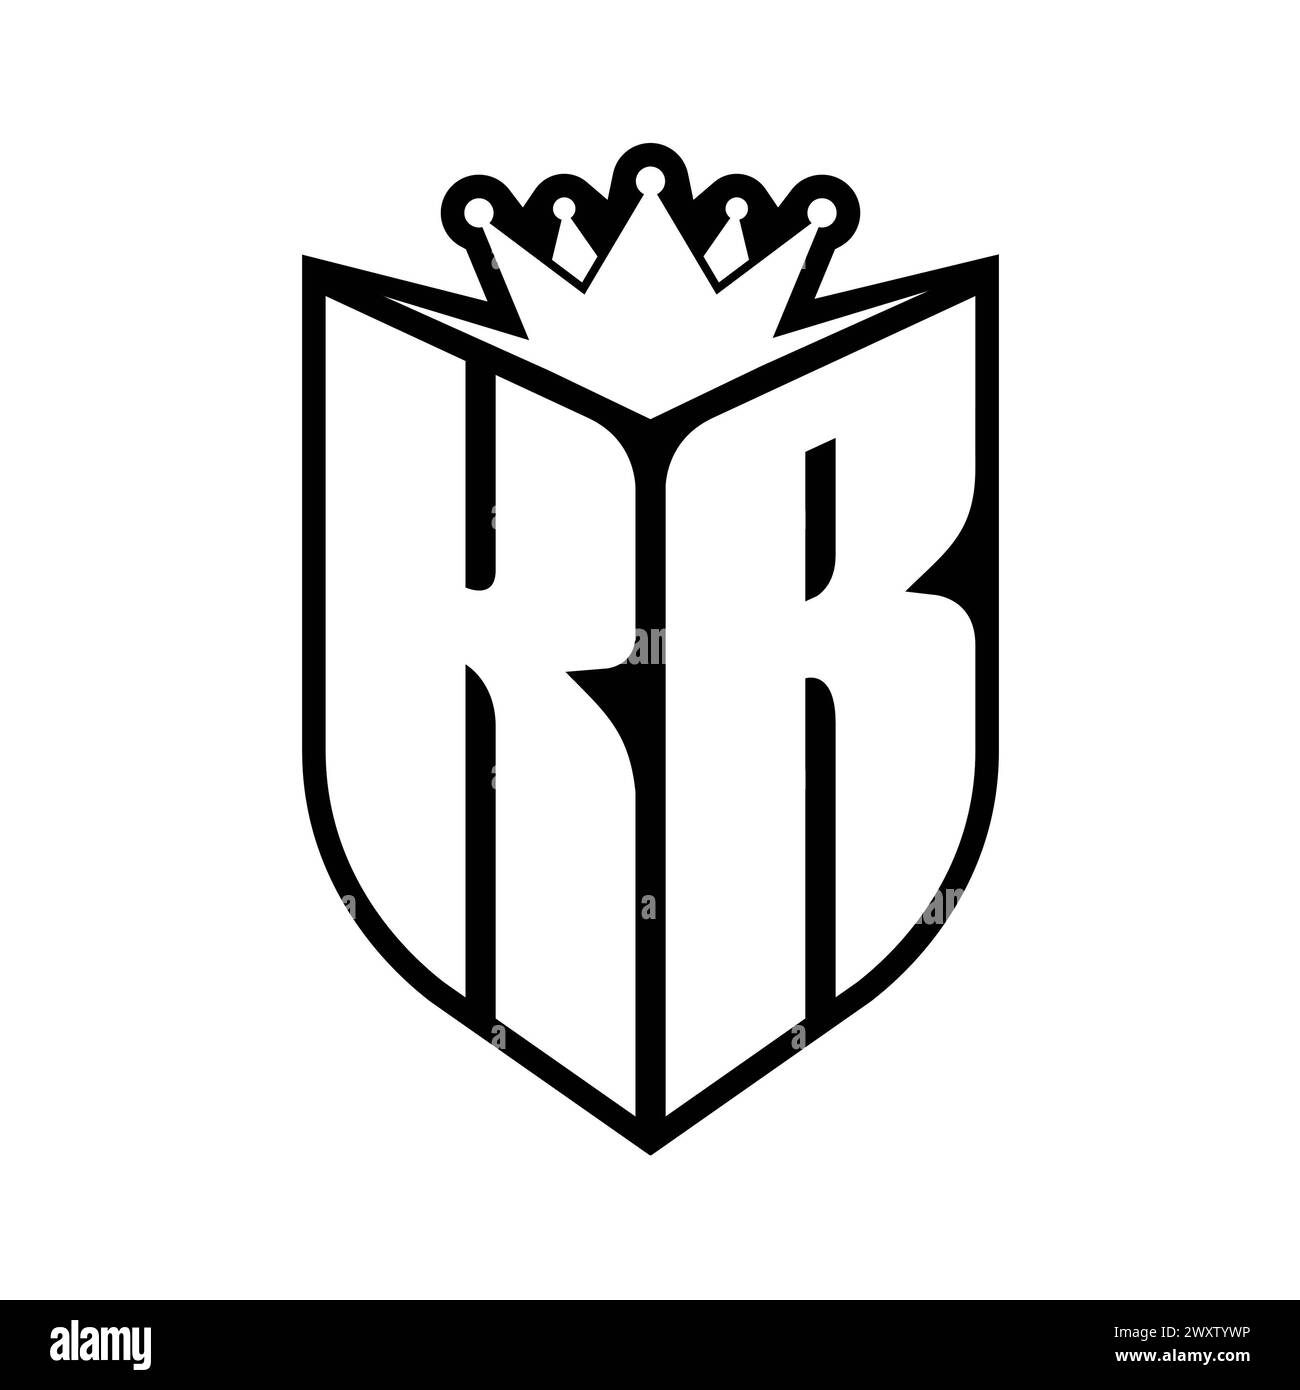 KR Letter bold monogram with shield shape and sharp crown inside shield black and white color design template Stock Photo